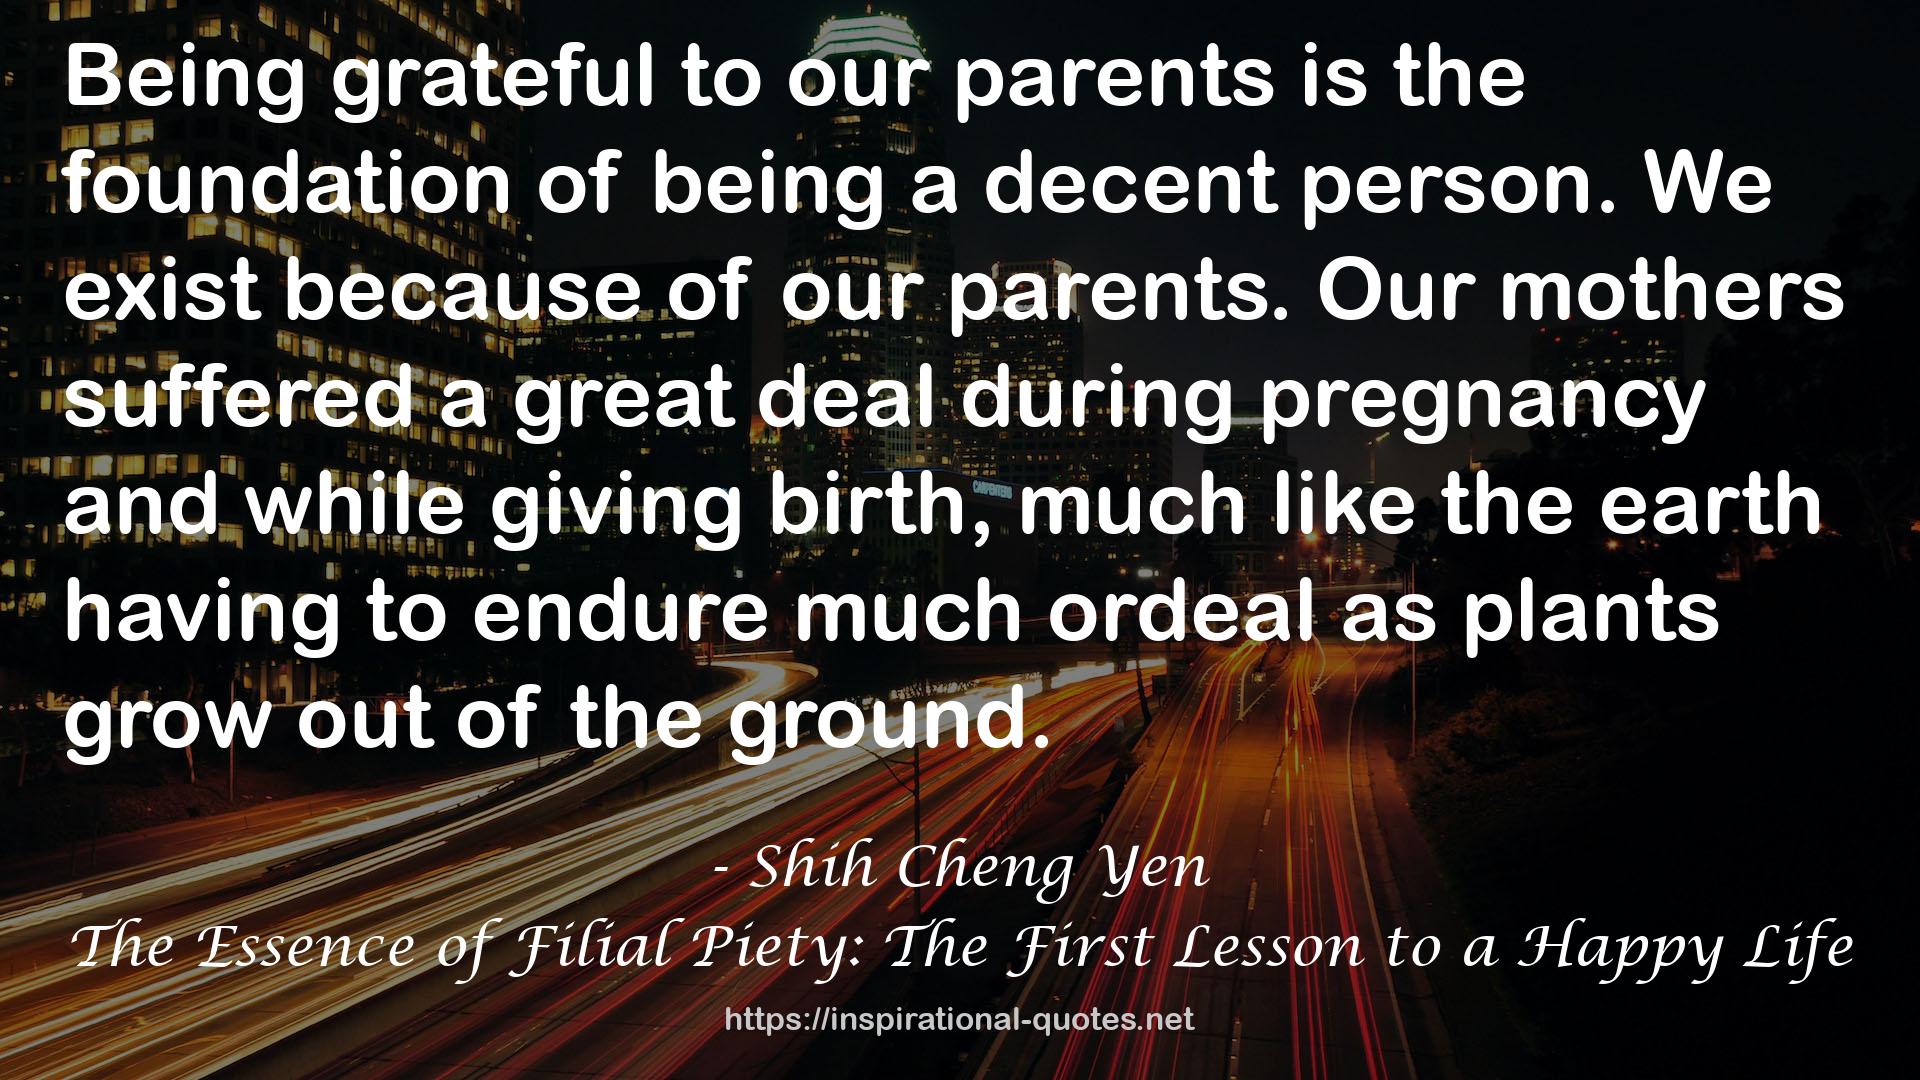 The Essence of Filial Piety: The First Lesson to a Happy Life QUOTES